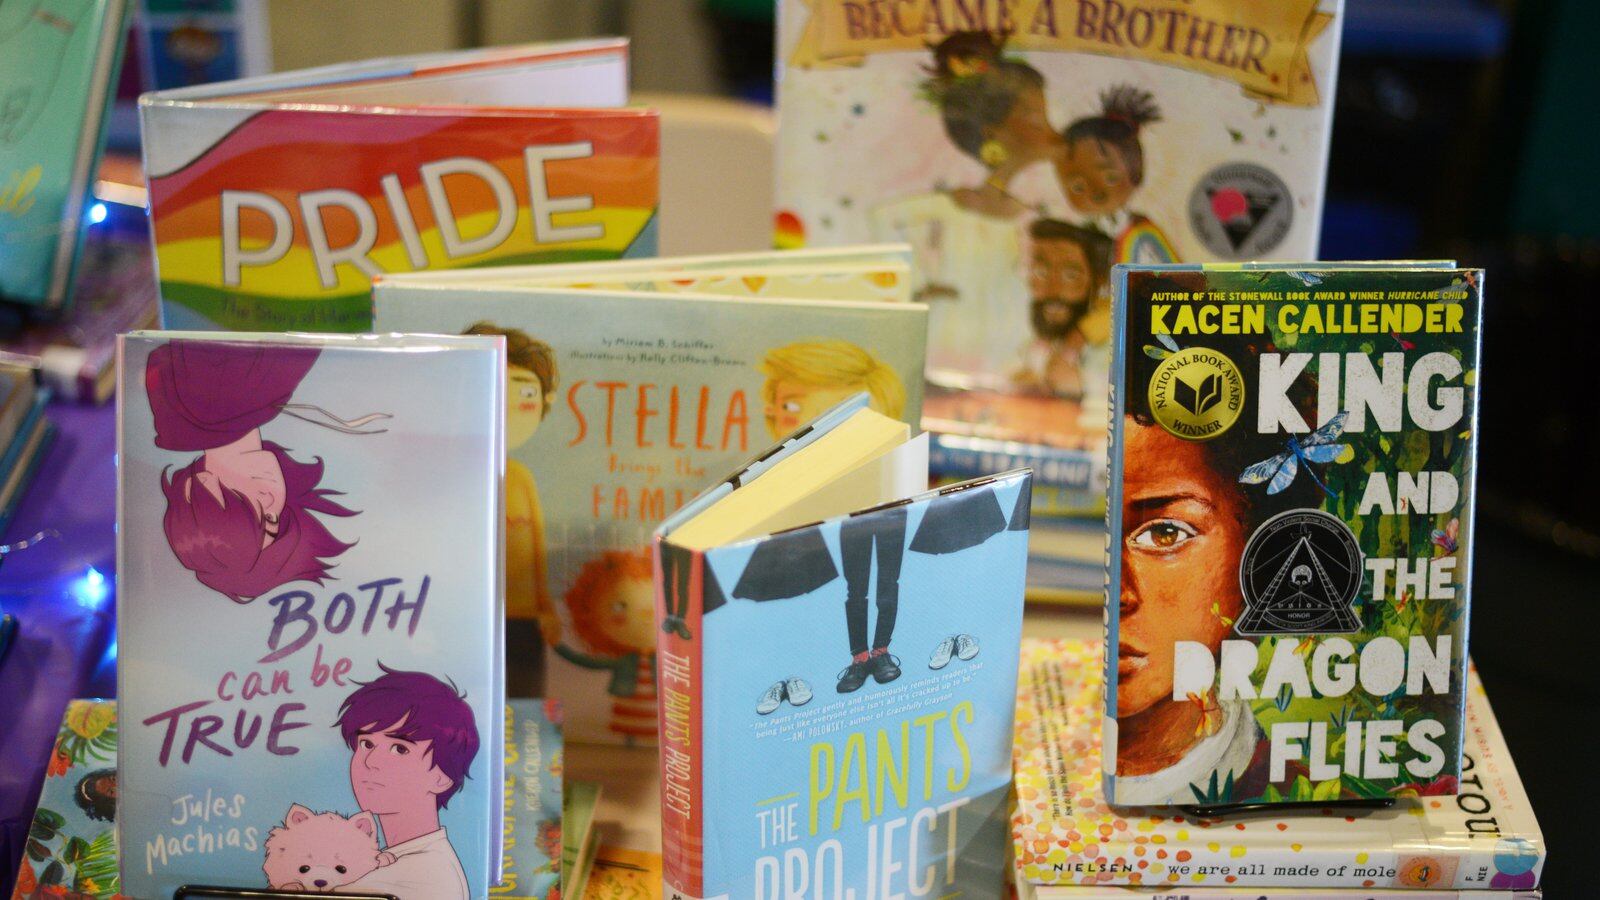 Children’s books about LGBTQ+ issues sit on a shelf.